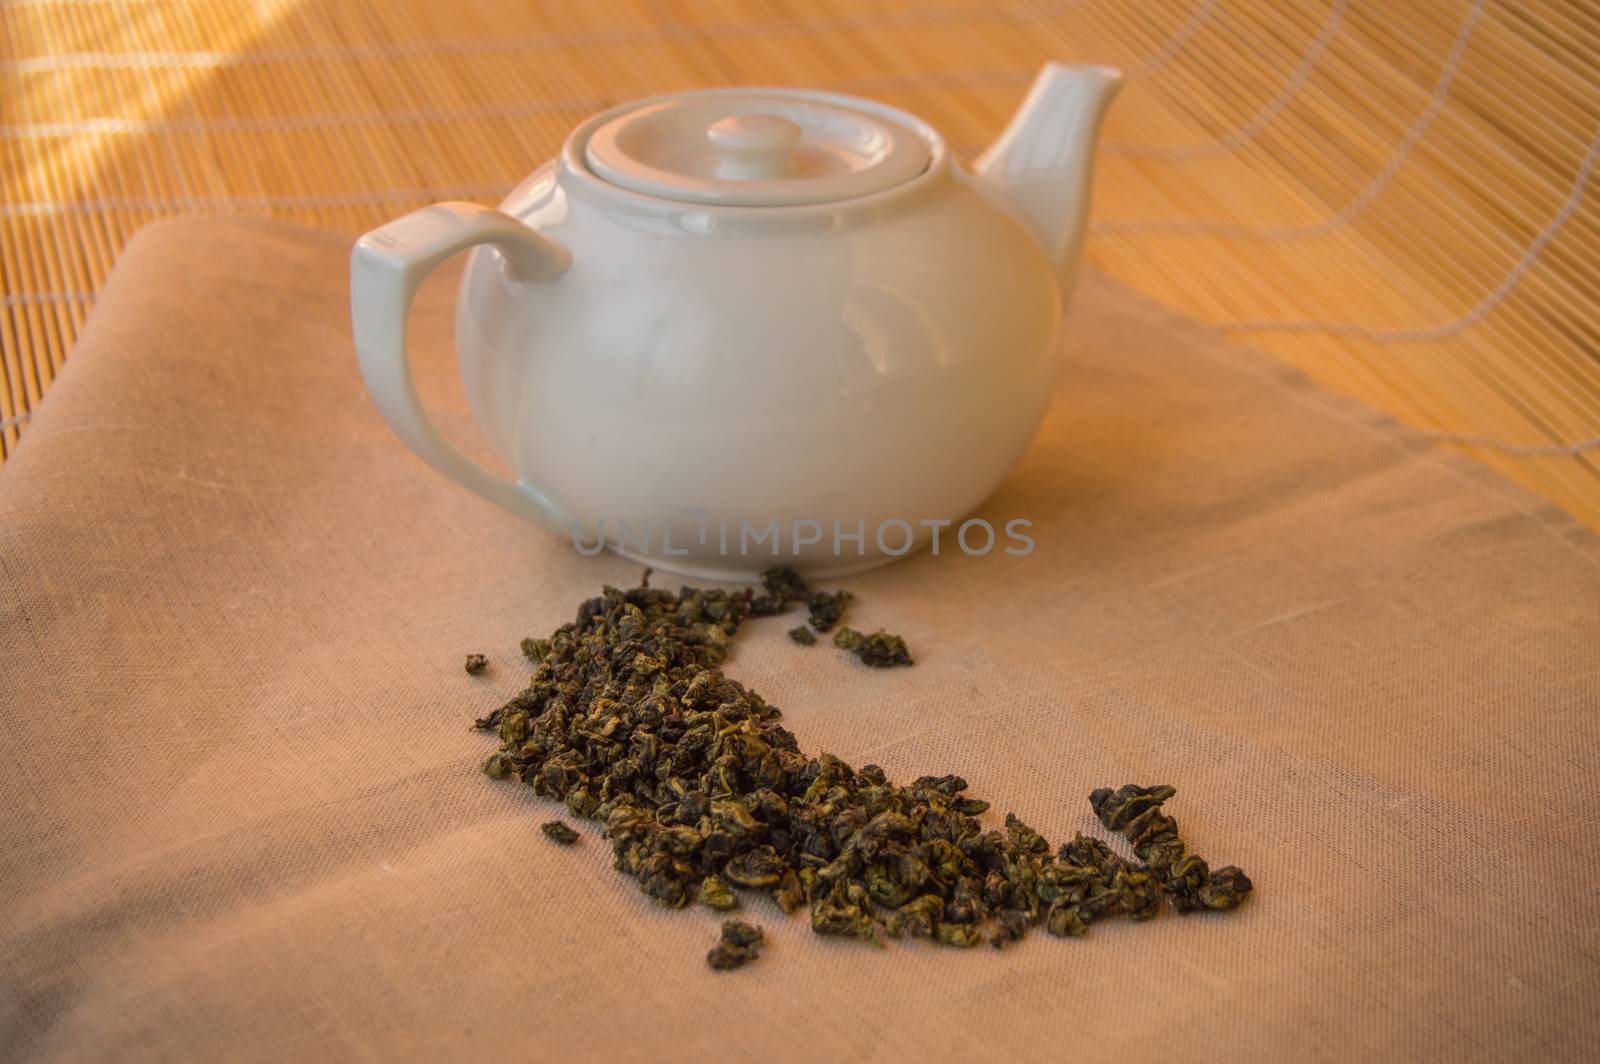 Teapot with green tea leaves on the napkin, bamboo background.